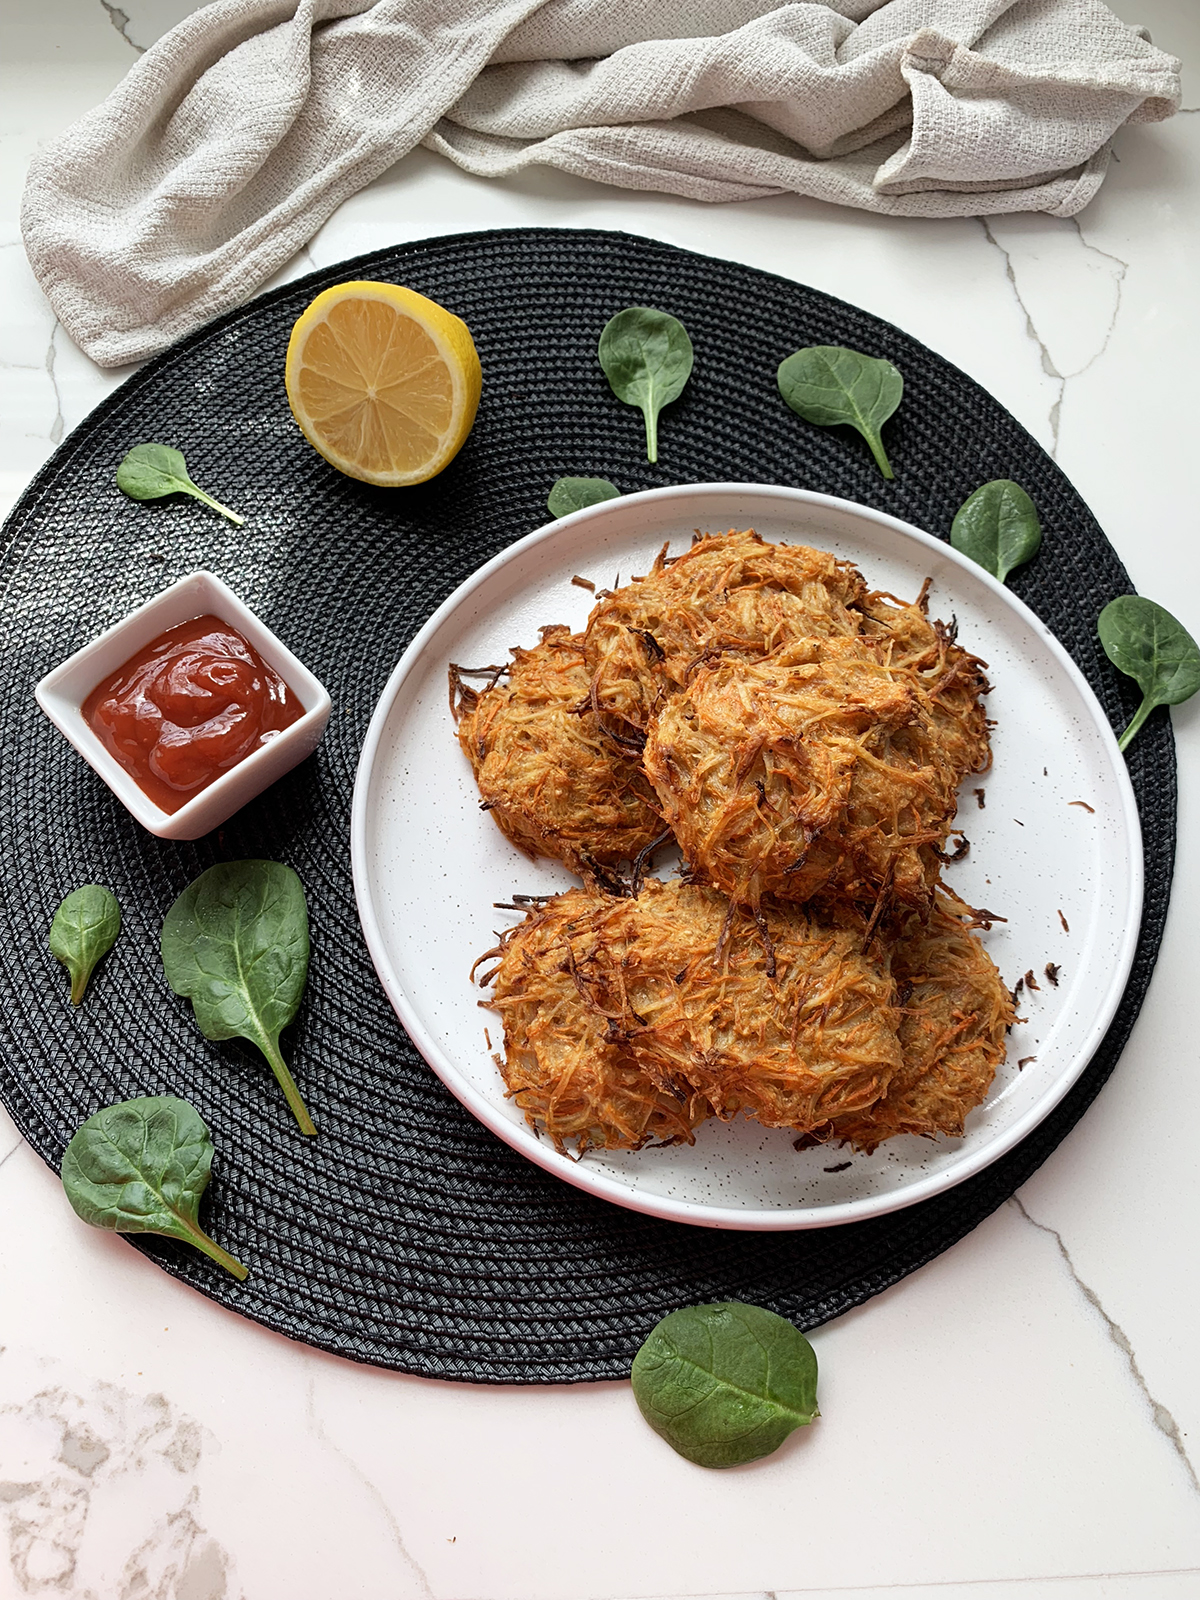 baked vegan hash browns served with tomato sauce